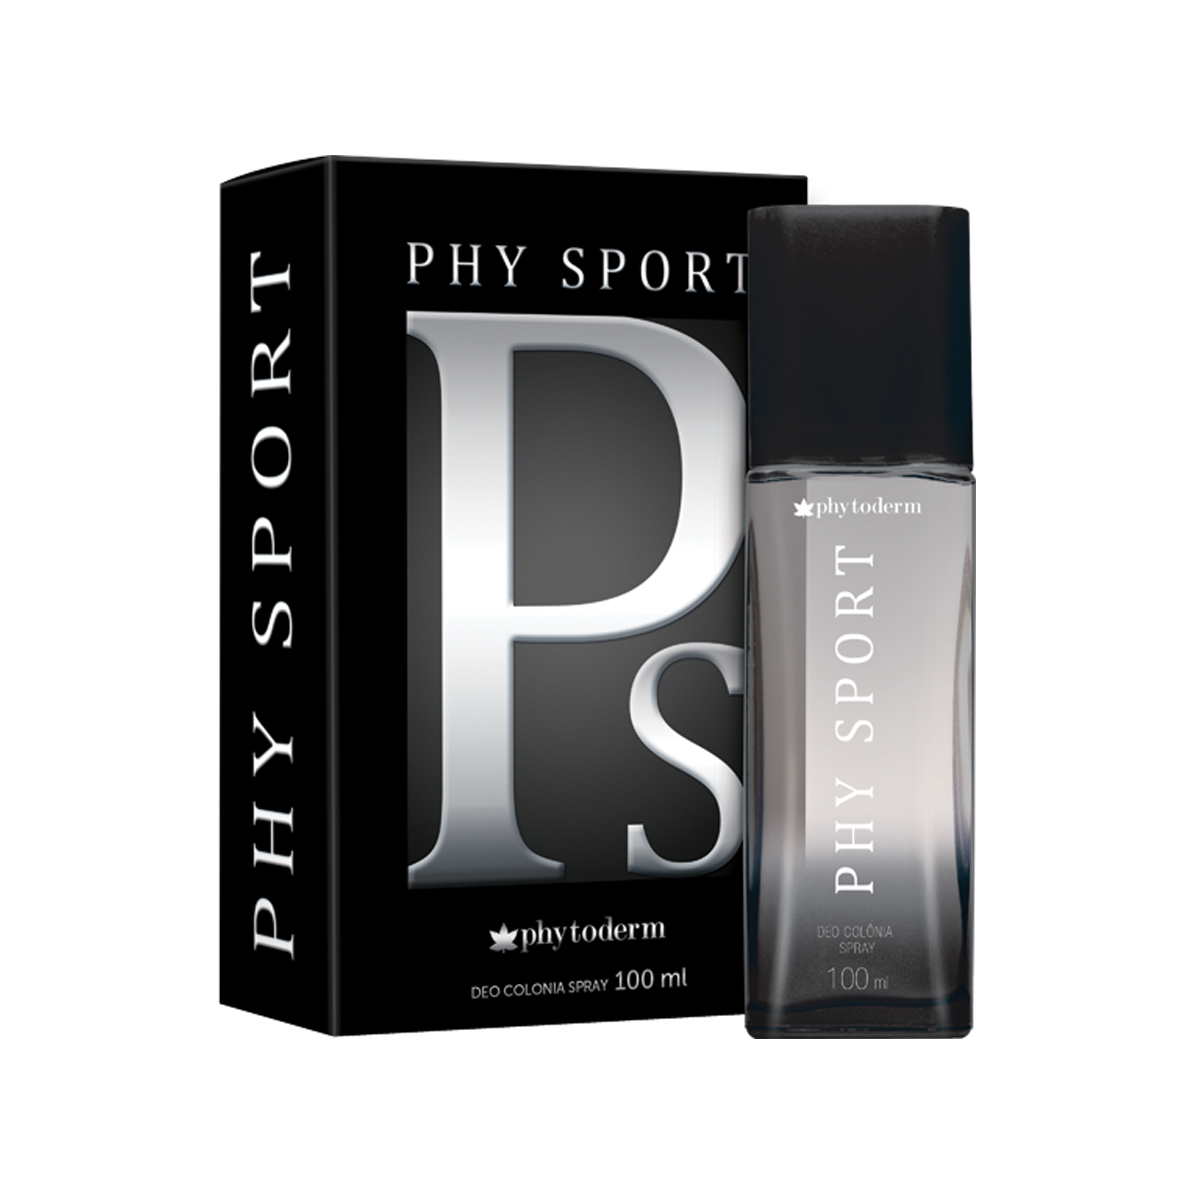 DEO COLONIA PHYTODERM 100ML PHY SPORT